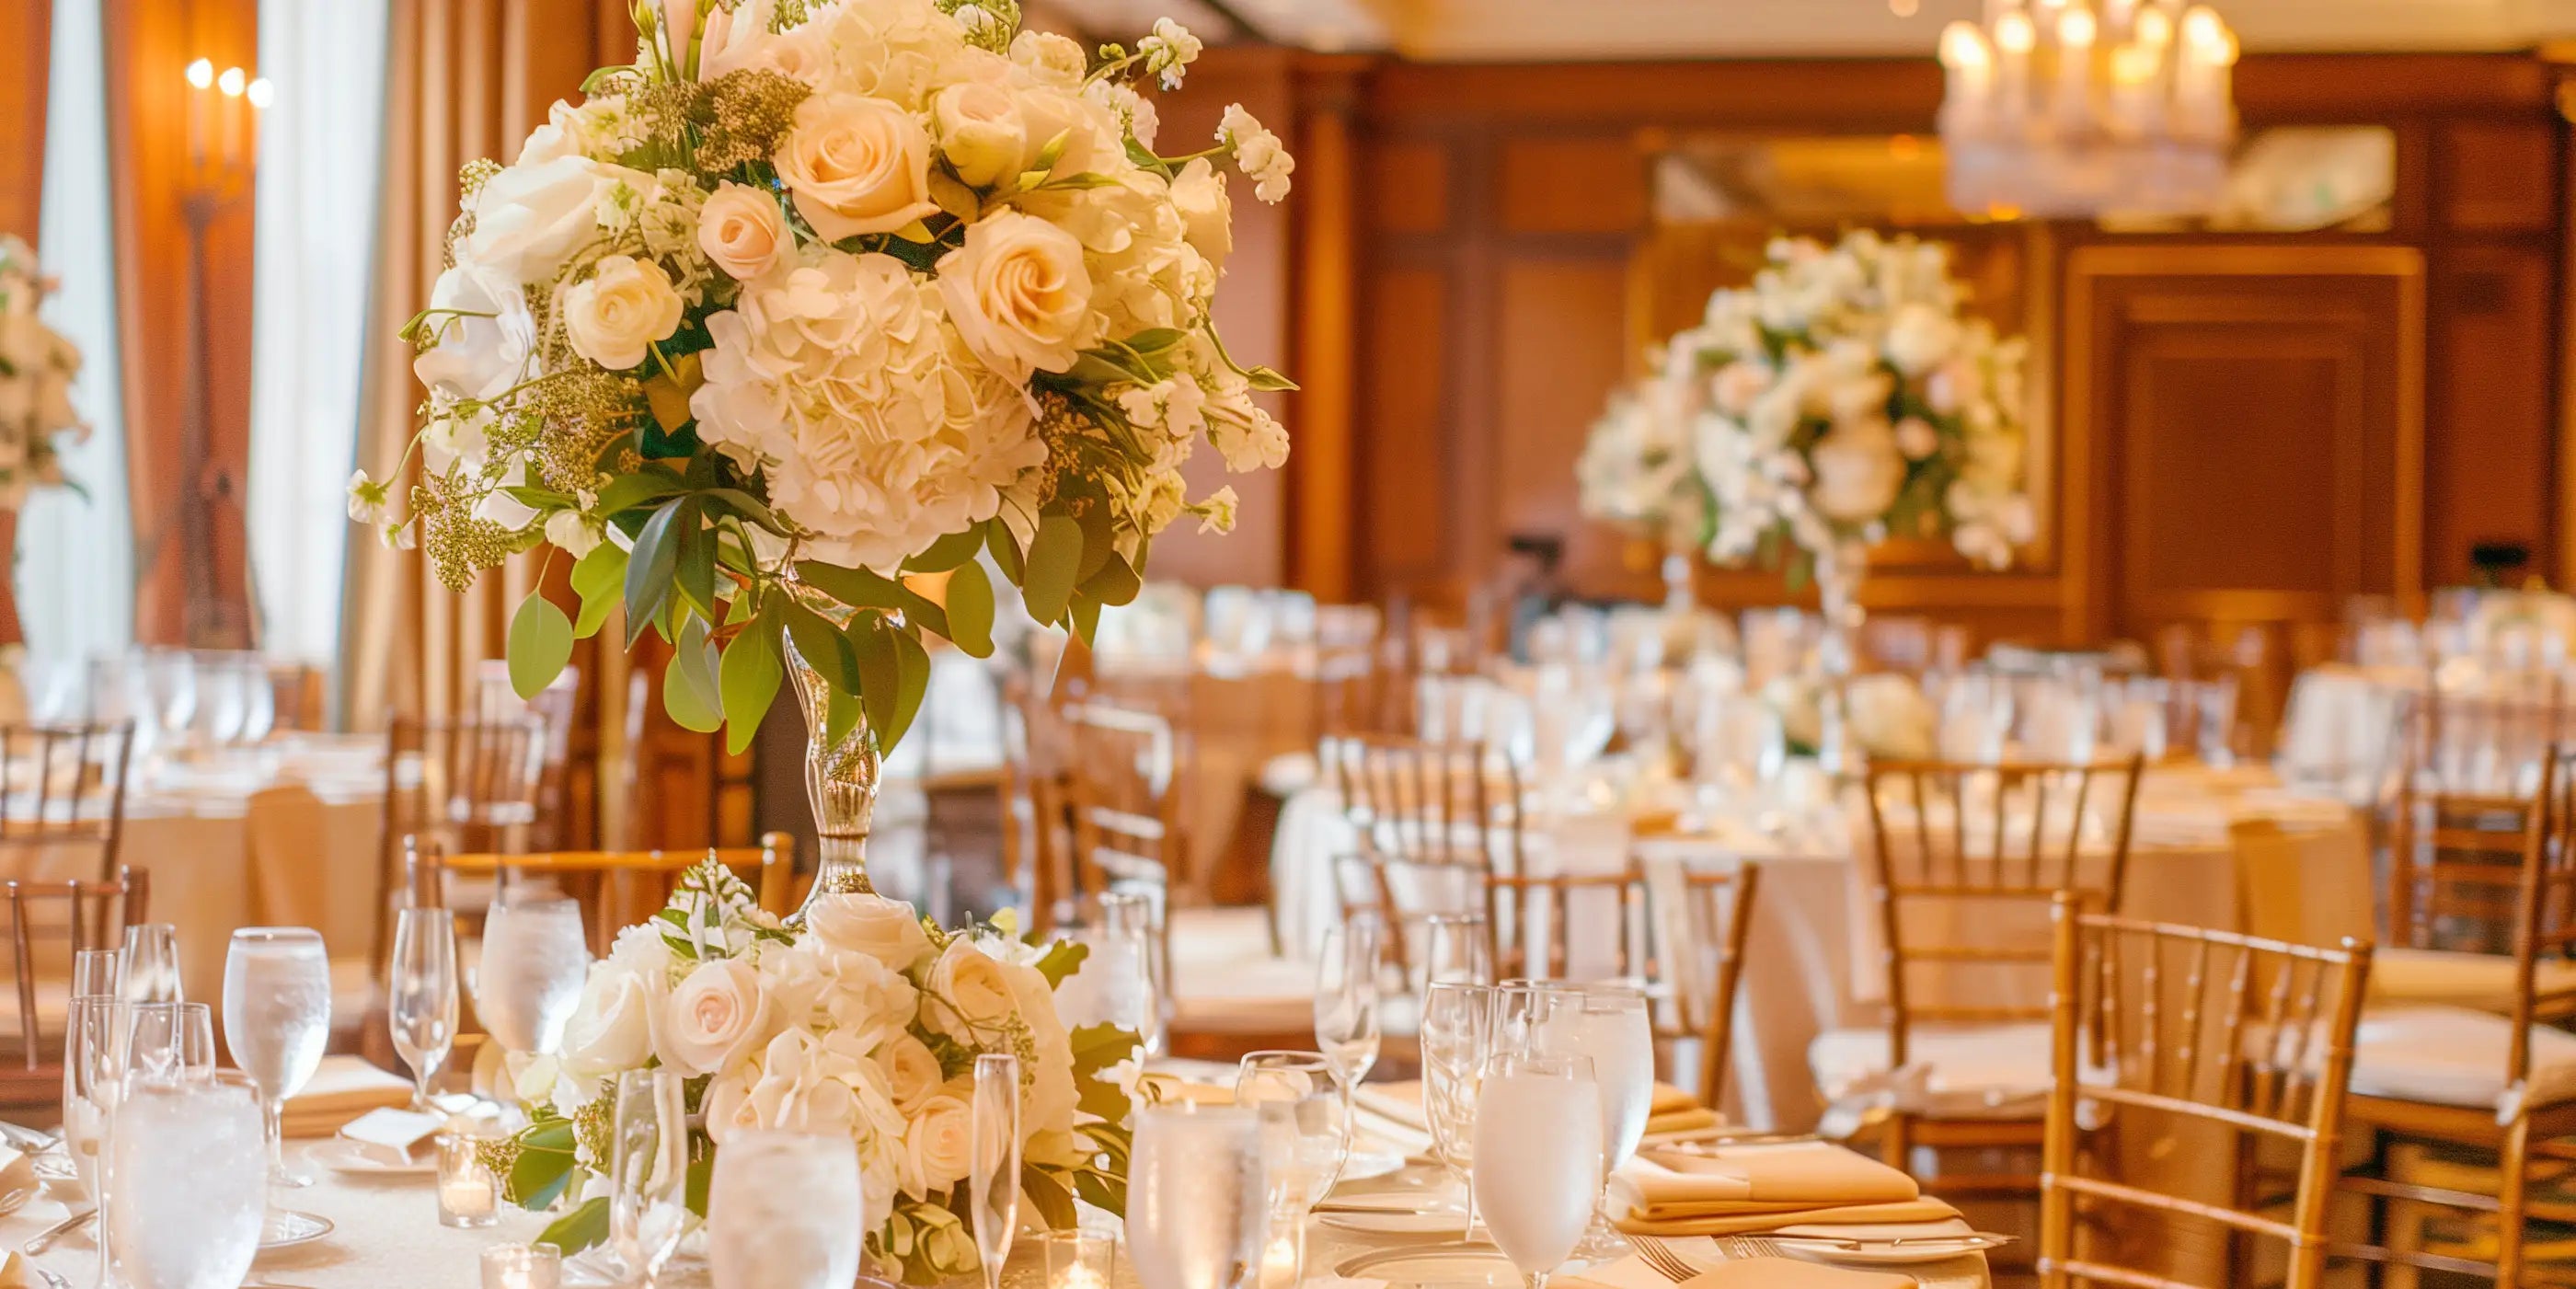 Elegant wedding reception with tall floral centrepieces featuring white roses and hydrangeas, highlighting Fabulous Flowers' commitment to sustainability and exquisite event design. Fabulous Flowers and Gifts.